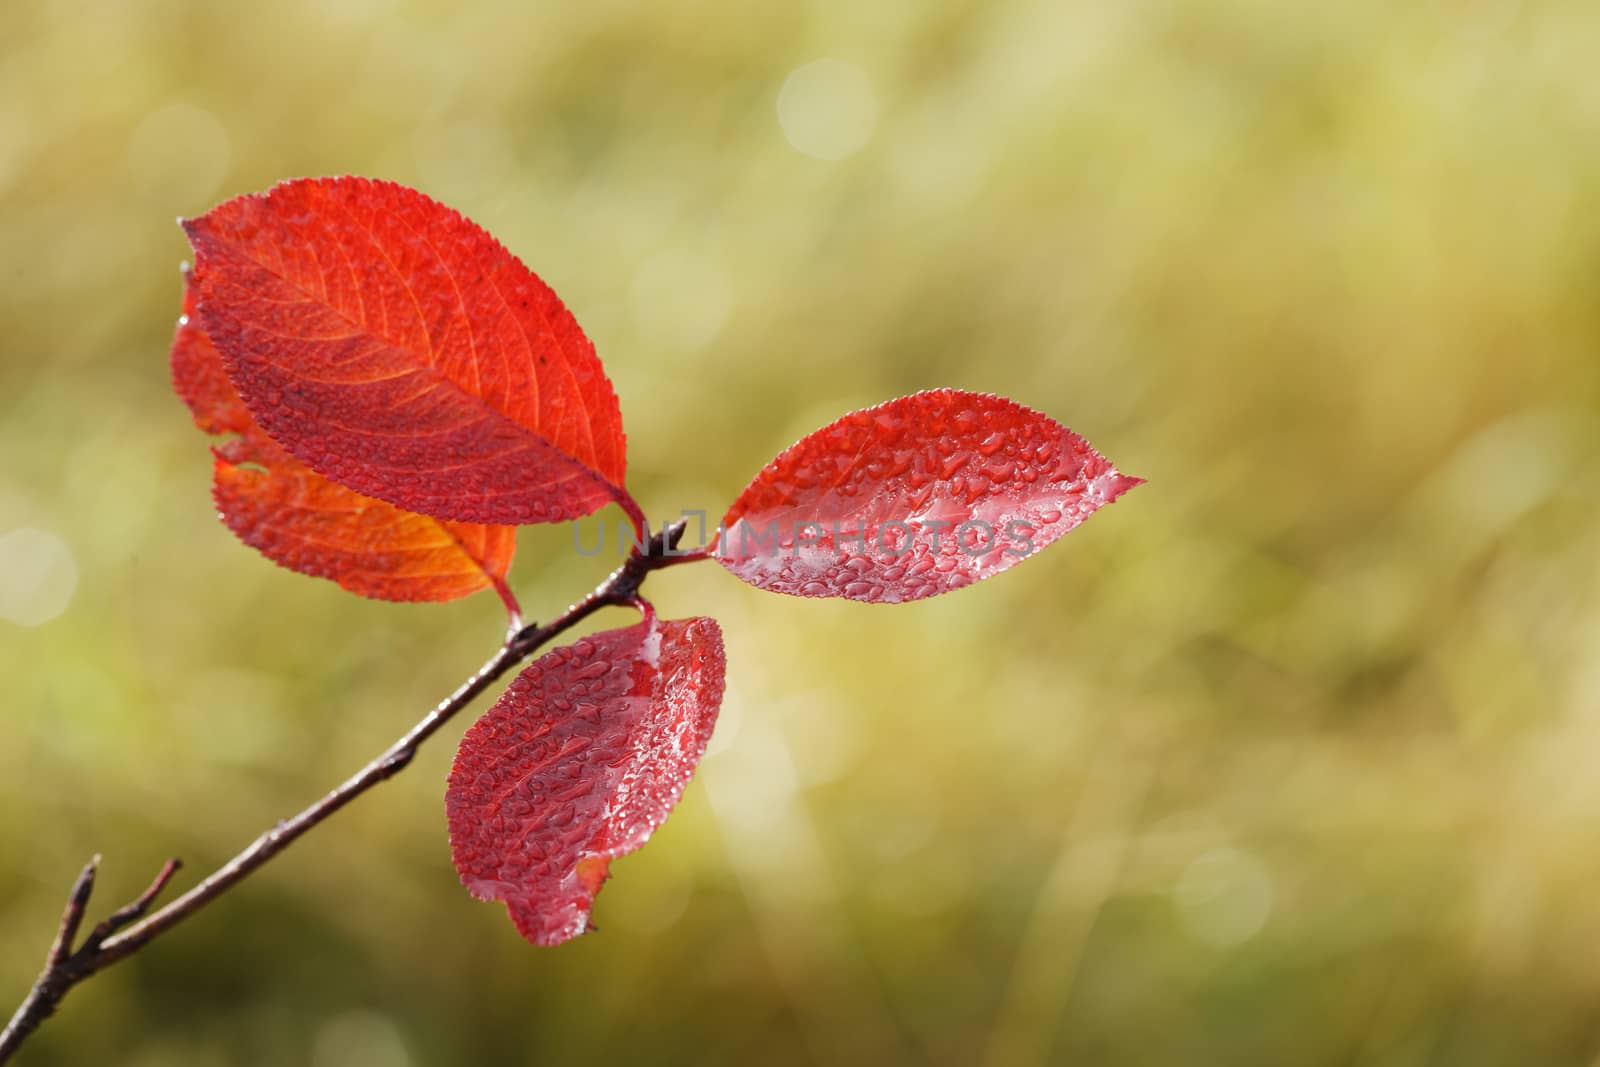 Red autumn leafs of aronia tree, fall colors of nature